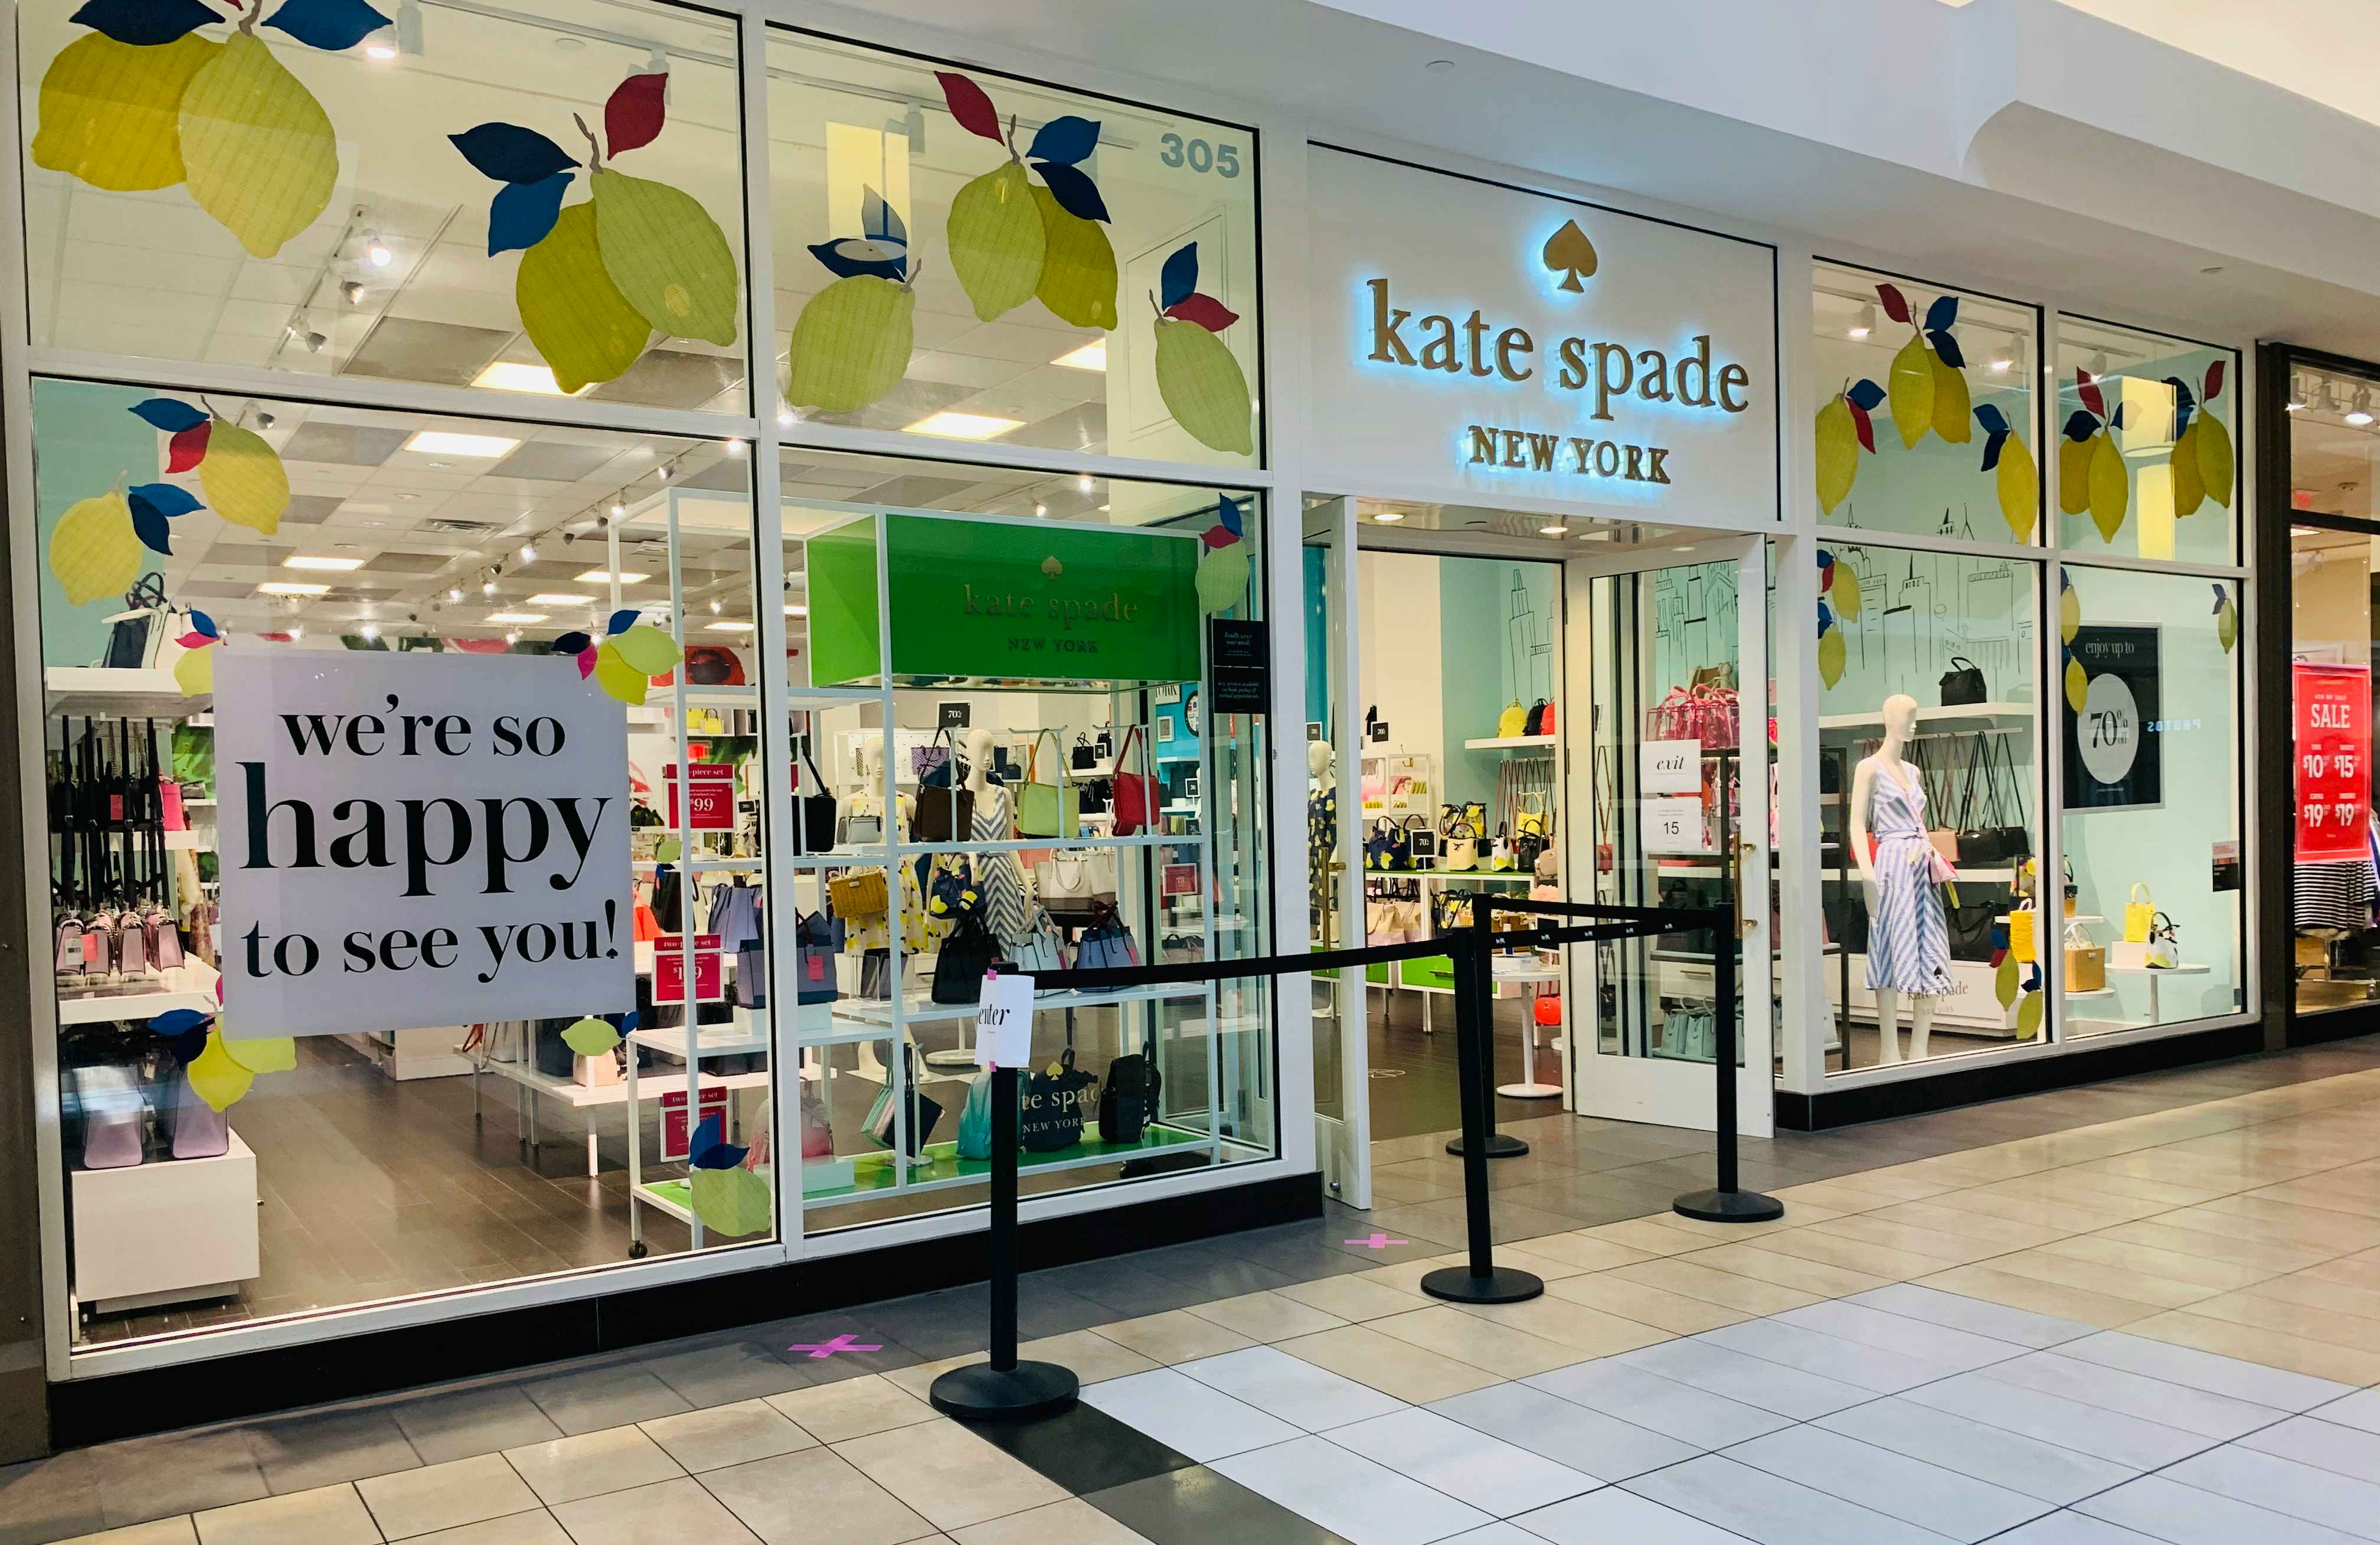 Kate Spade Bundle & Save sale; up to 75% off handbags, wallets, accessories  and more 